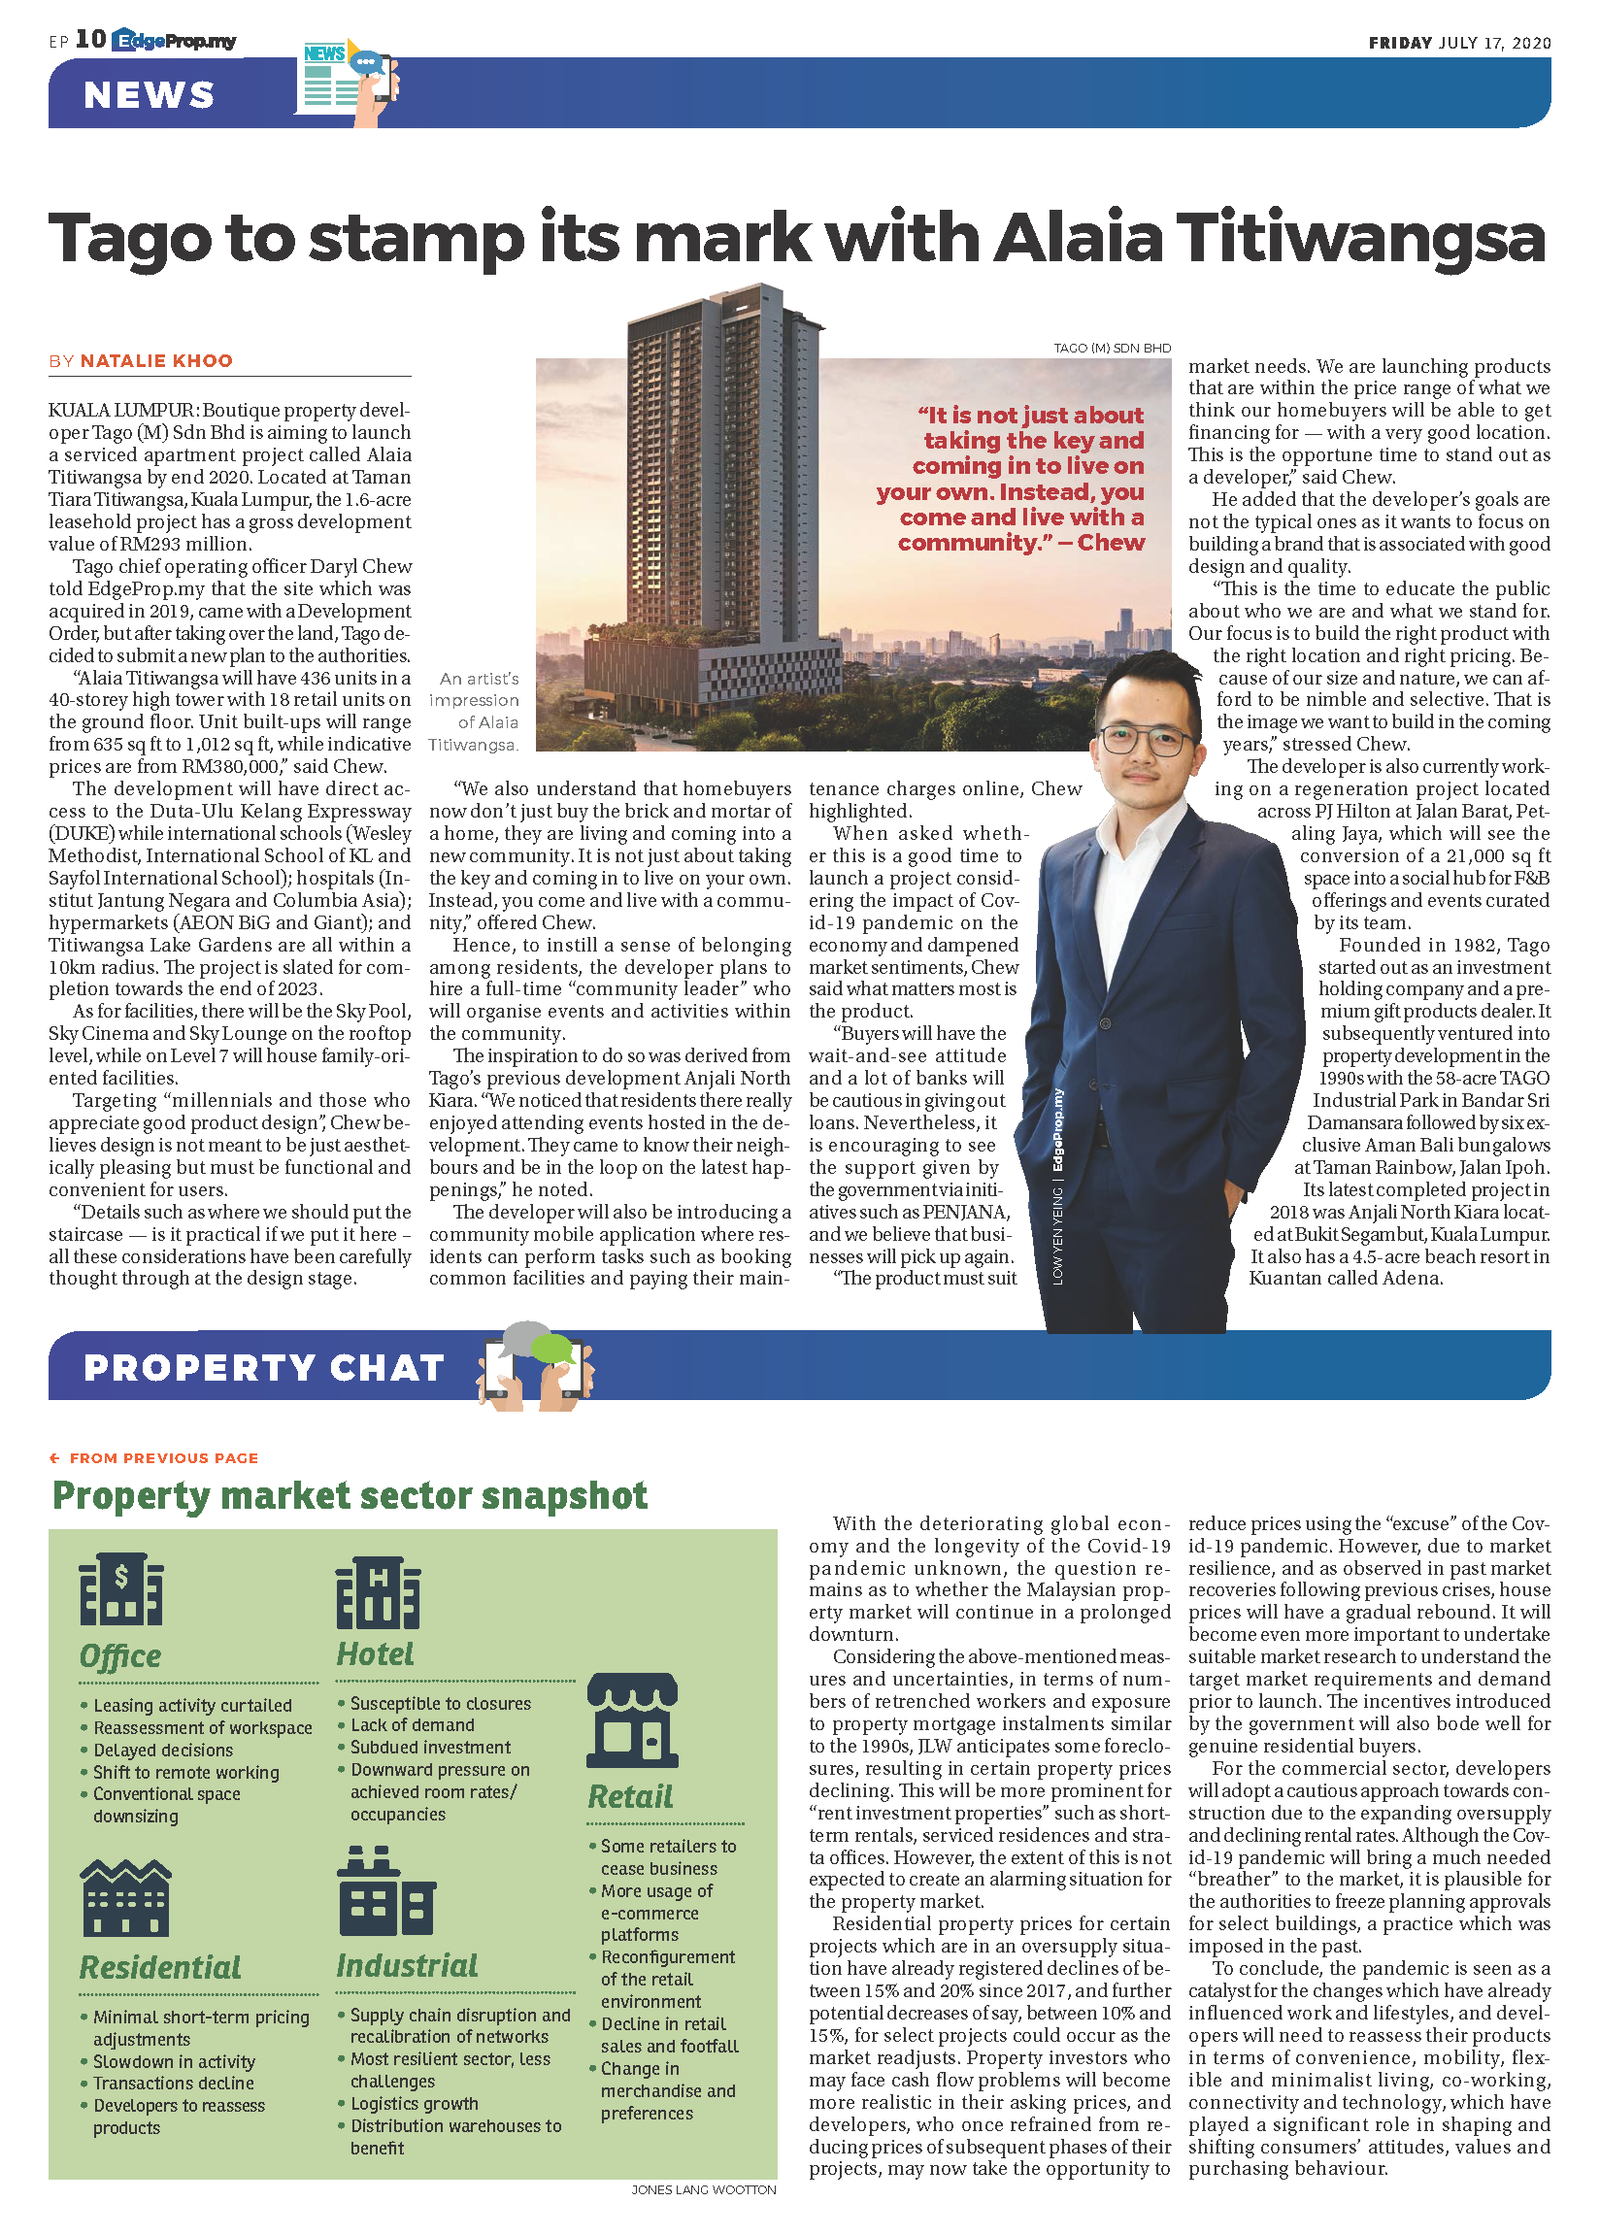 TAGO IN EDGE PROPERTY PULLOUT: TAGO TO STAMP ITS MARK WITH ALAIA TITIWANGSA